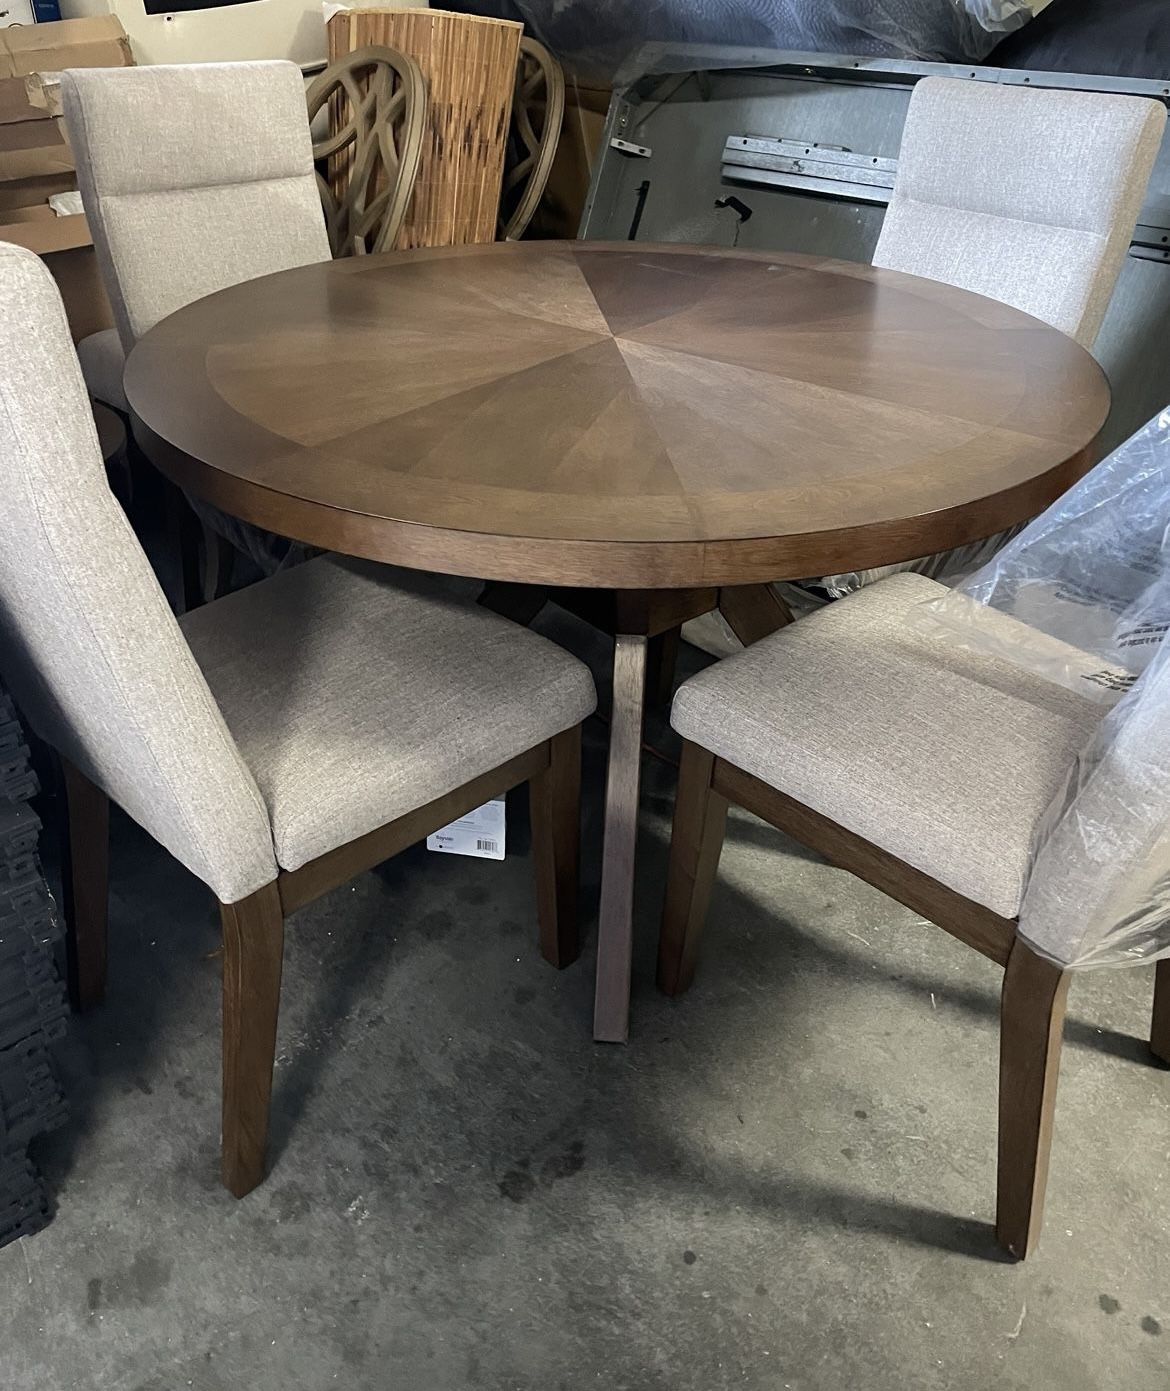 New Round Kitchen Table And Chairs 